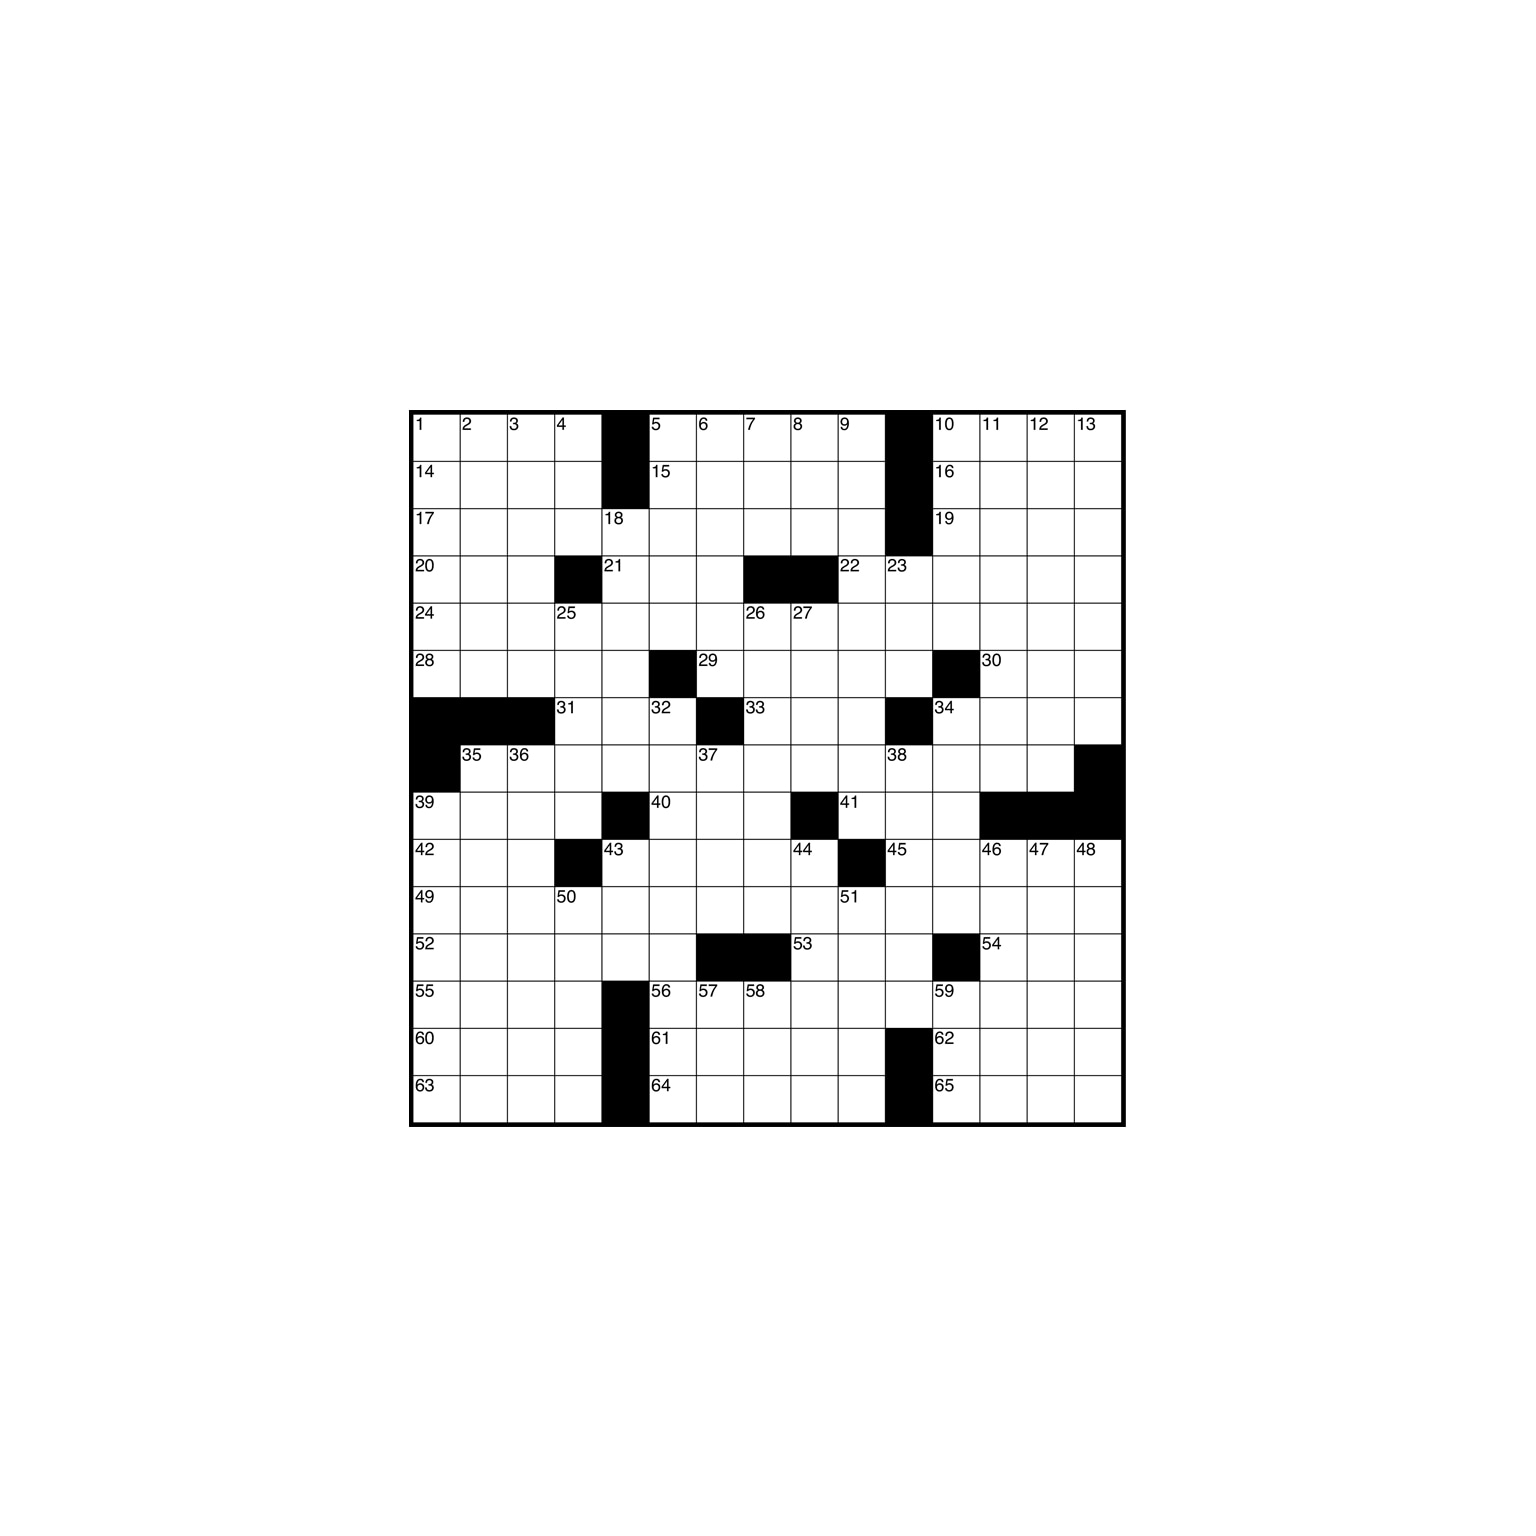 Image of a crossword puzzle